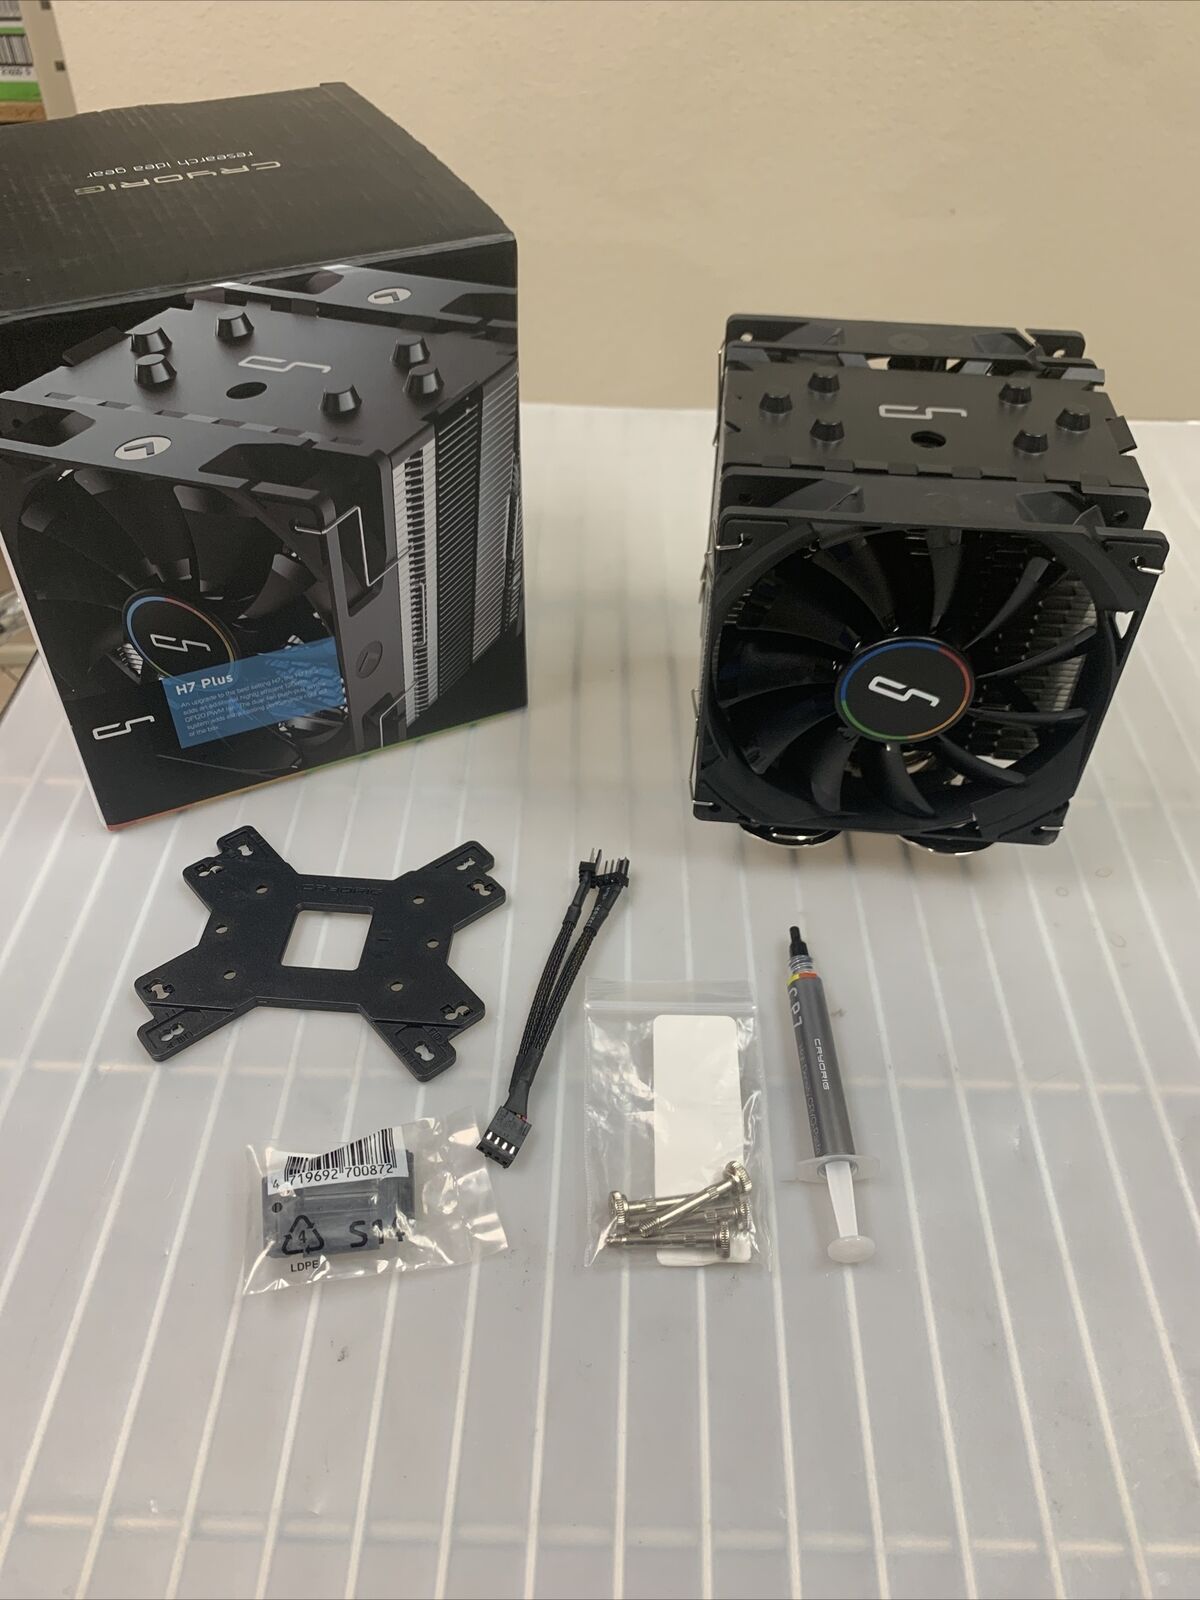 CRYORIG H7 Plus Dual 120mm Fan Tower CPU Cooler - See Images For Condition